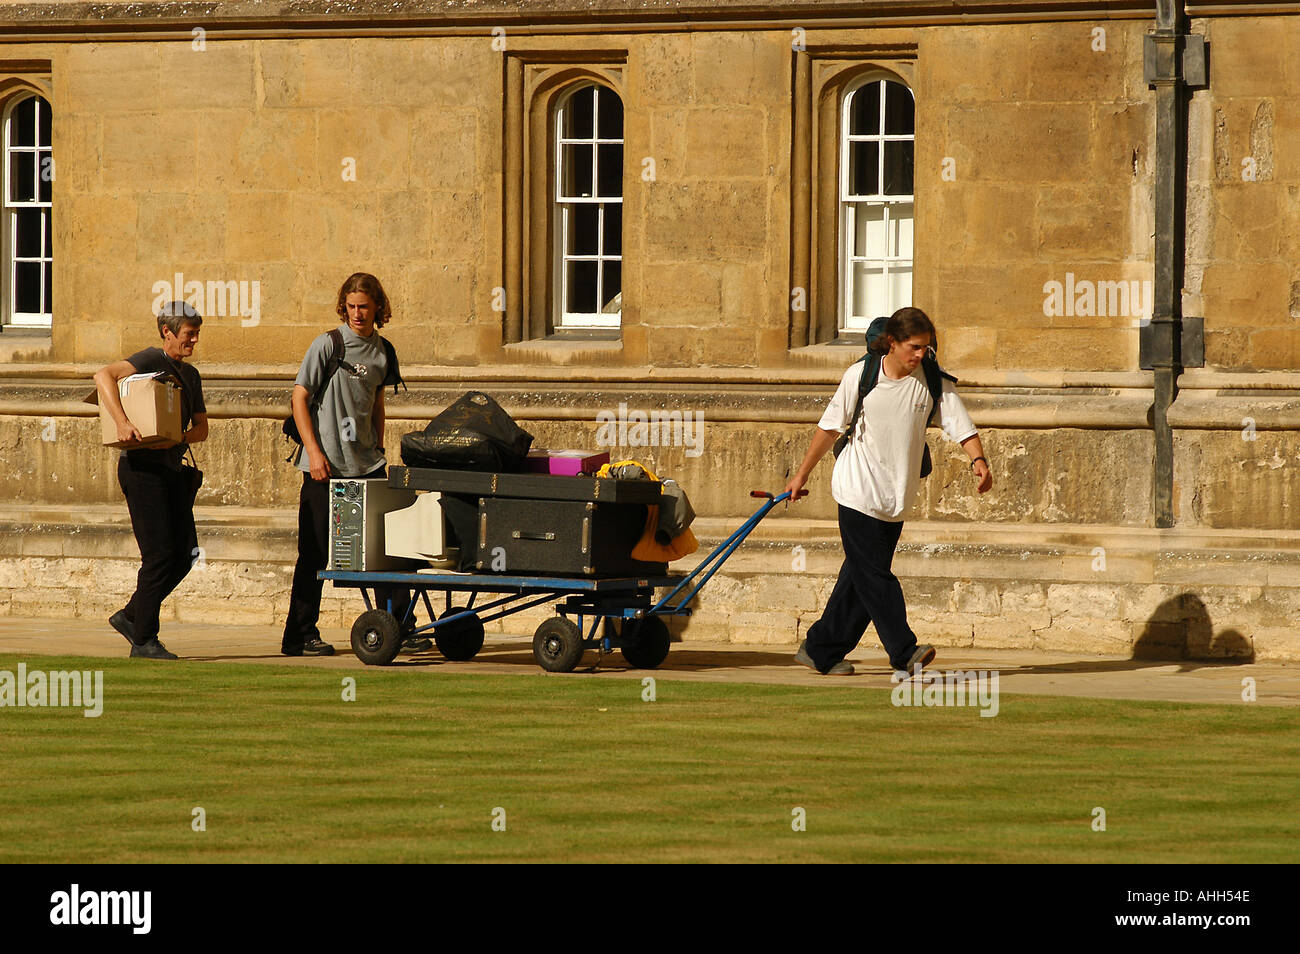 Student arriving at university, Wadham College, Oxford Stock Photo